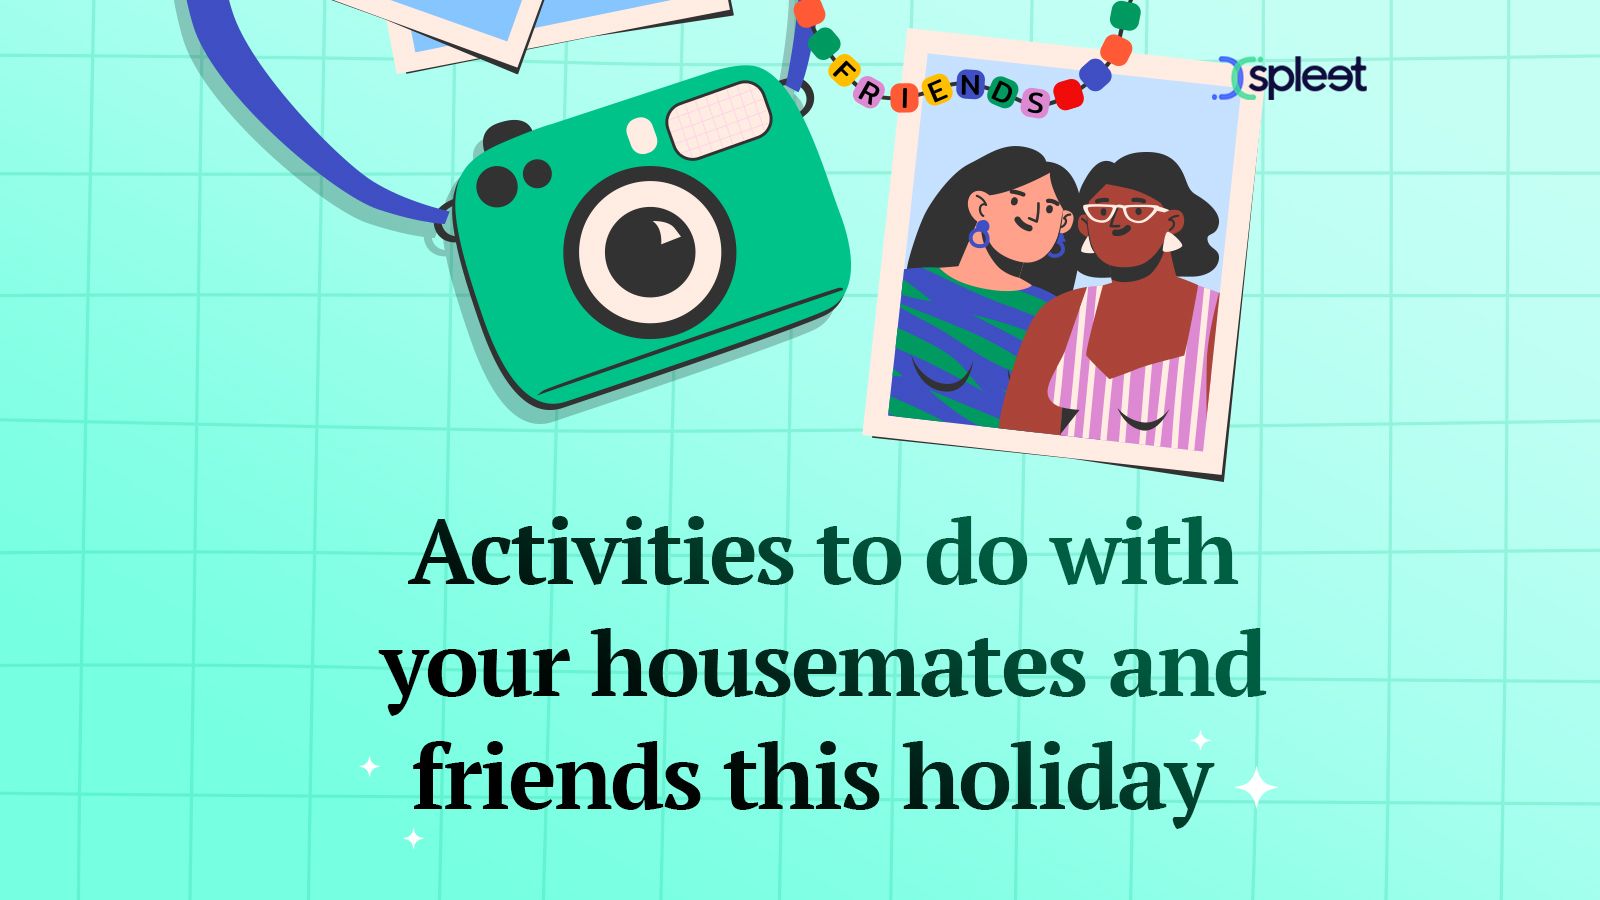 10 activities to do with your housemates and friends this holiday